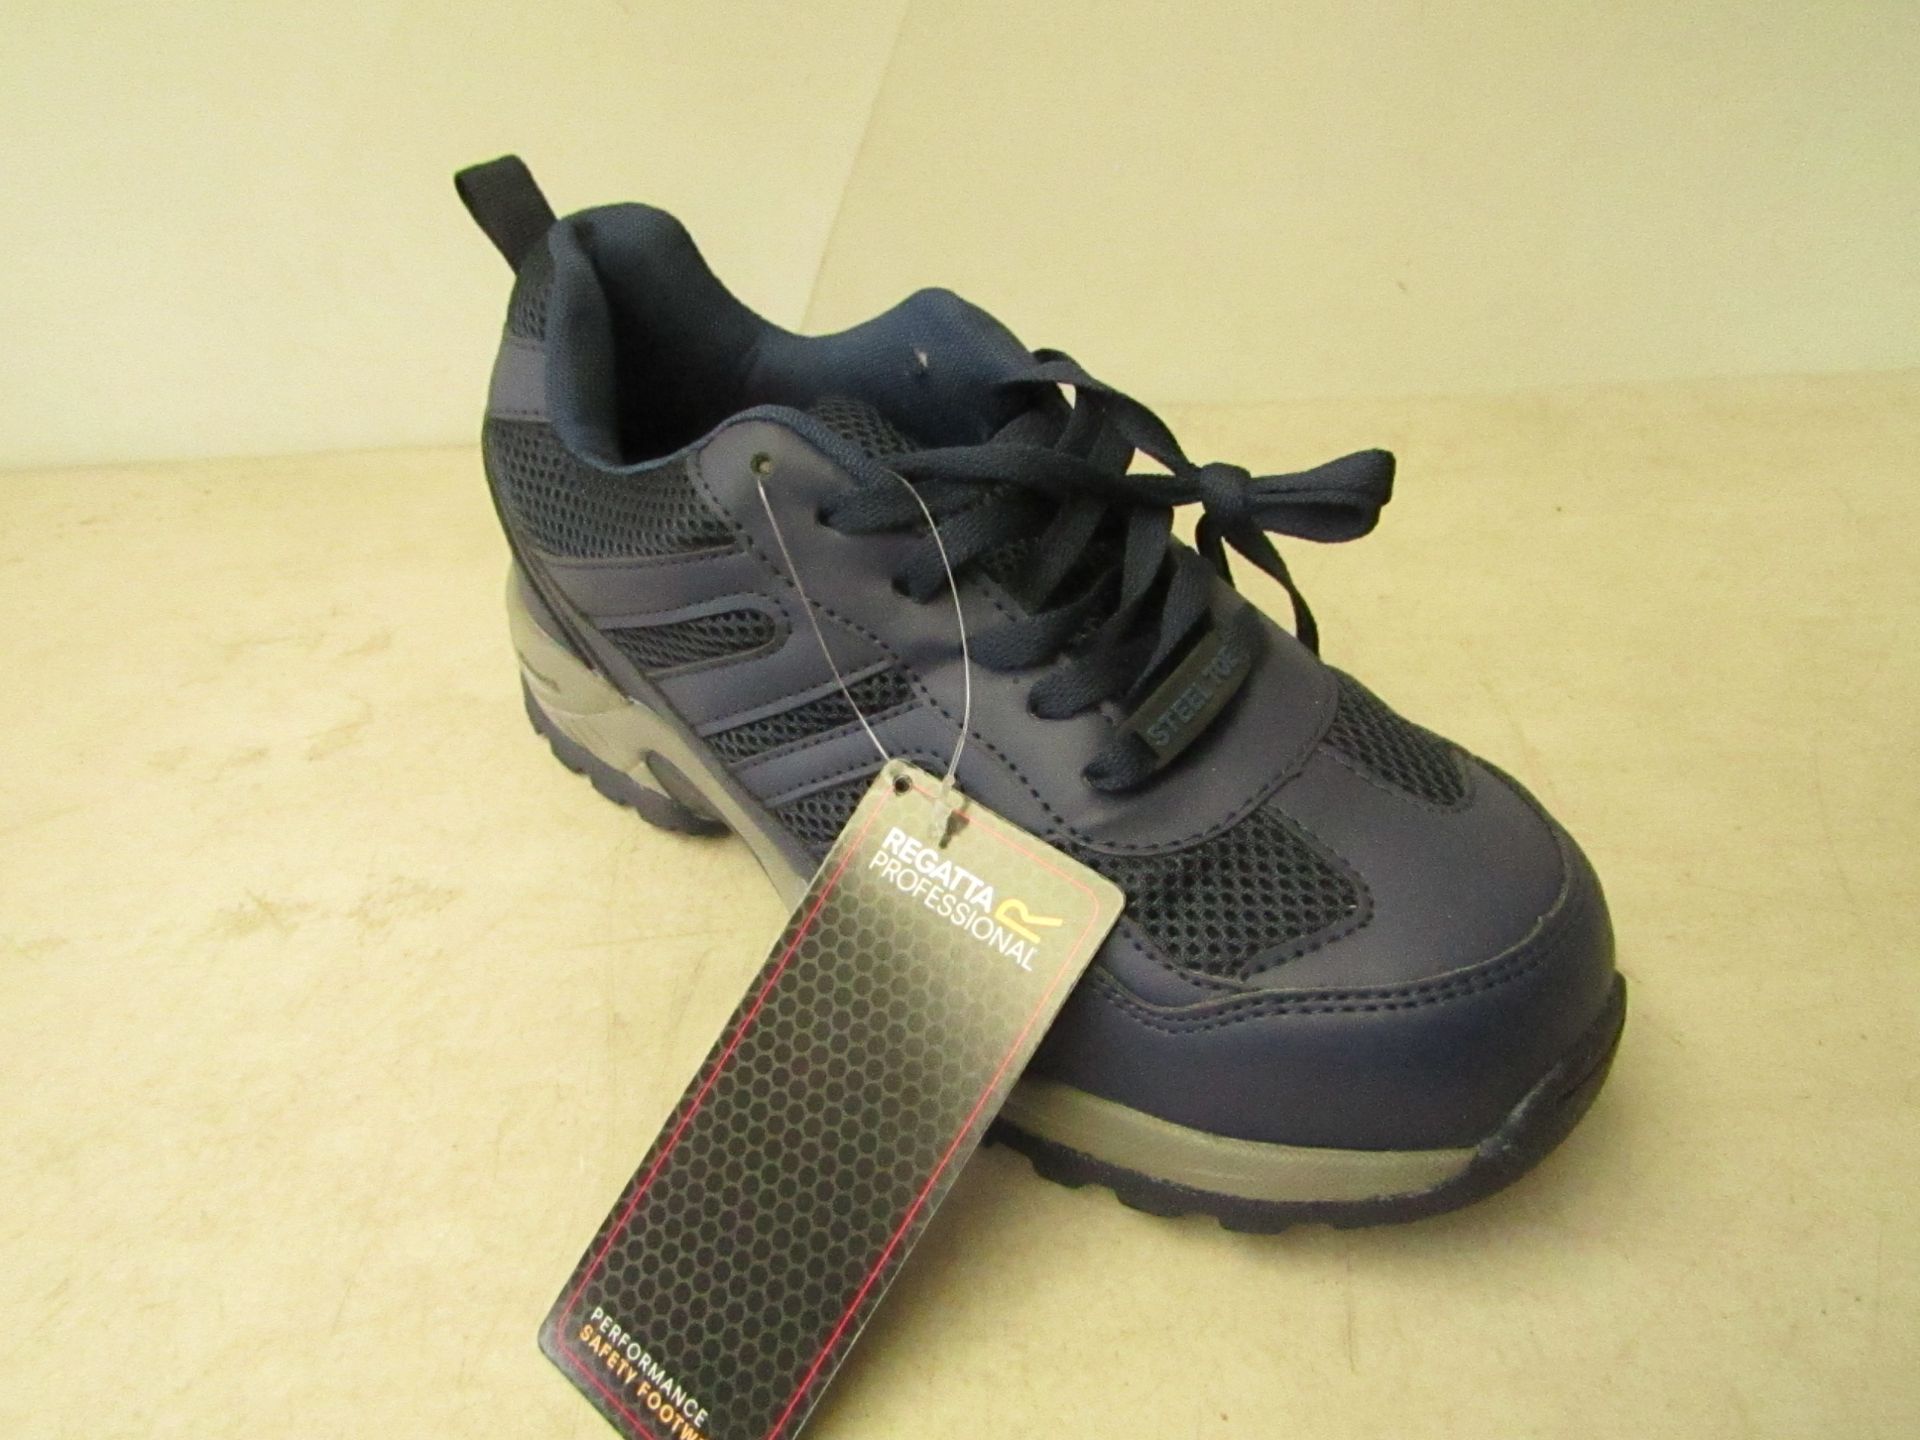 Regatta Professional StepLite safety trainers, size 10, new and boxed.